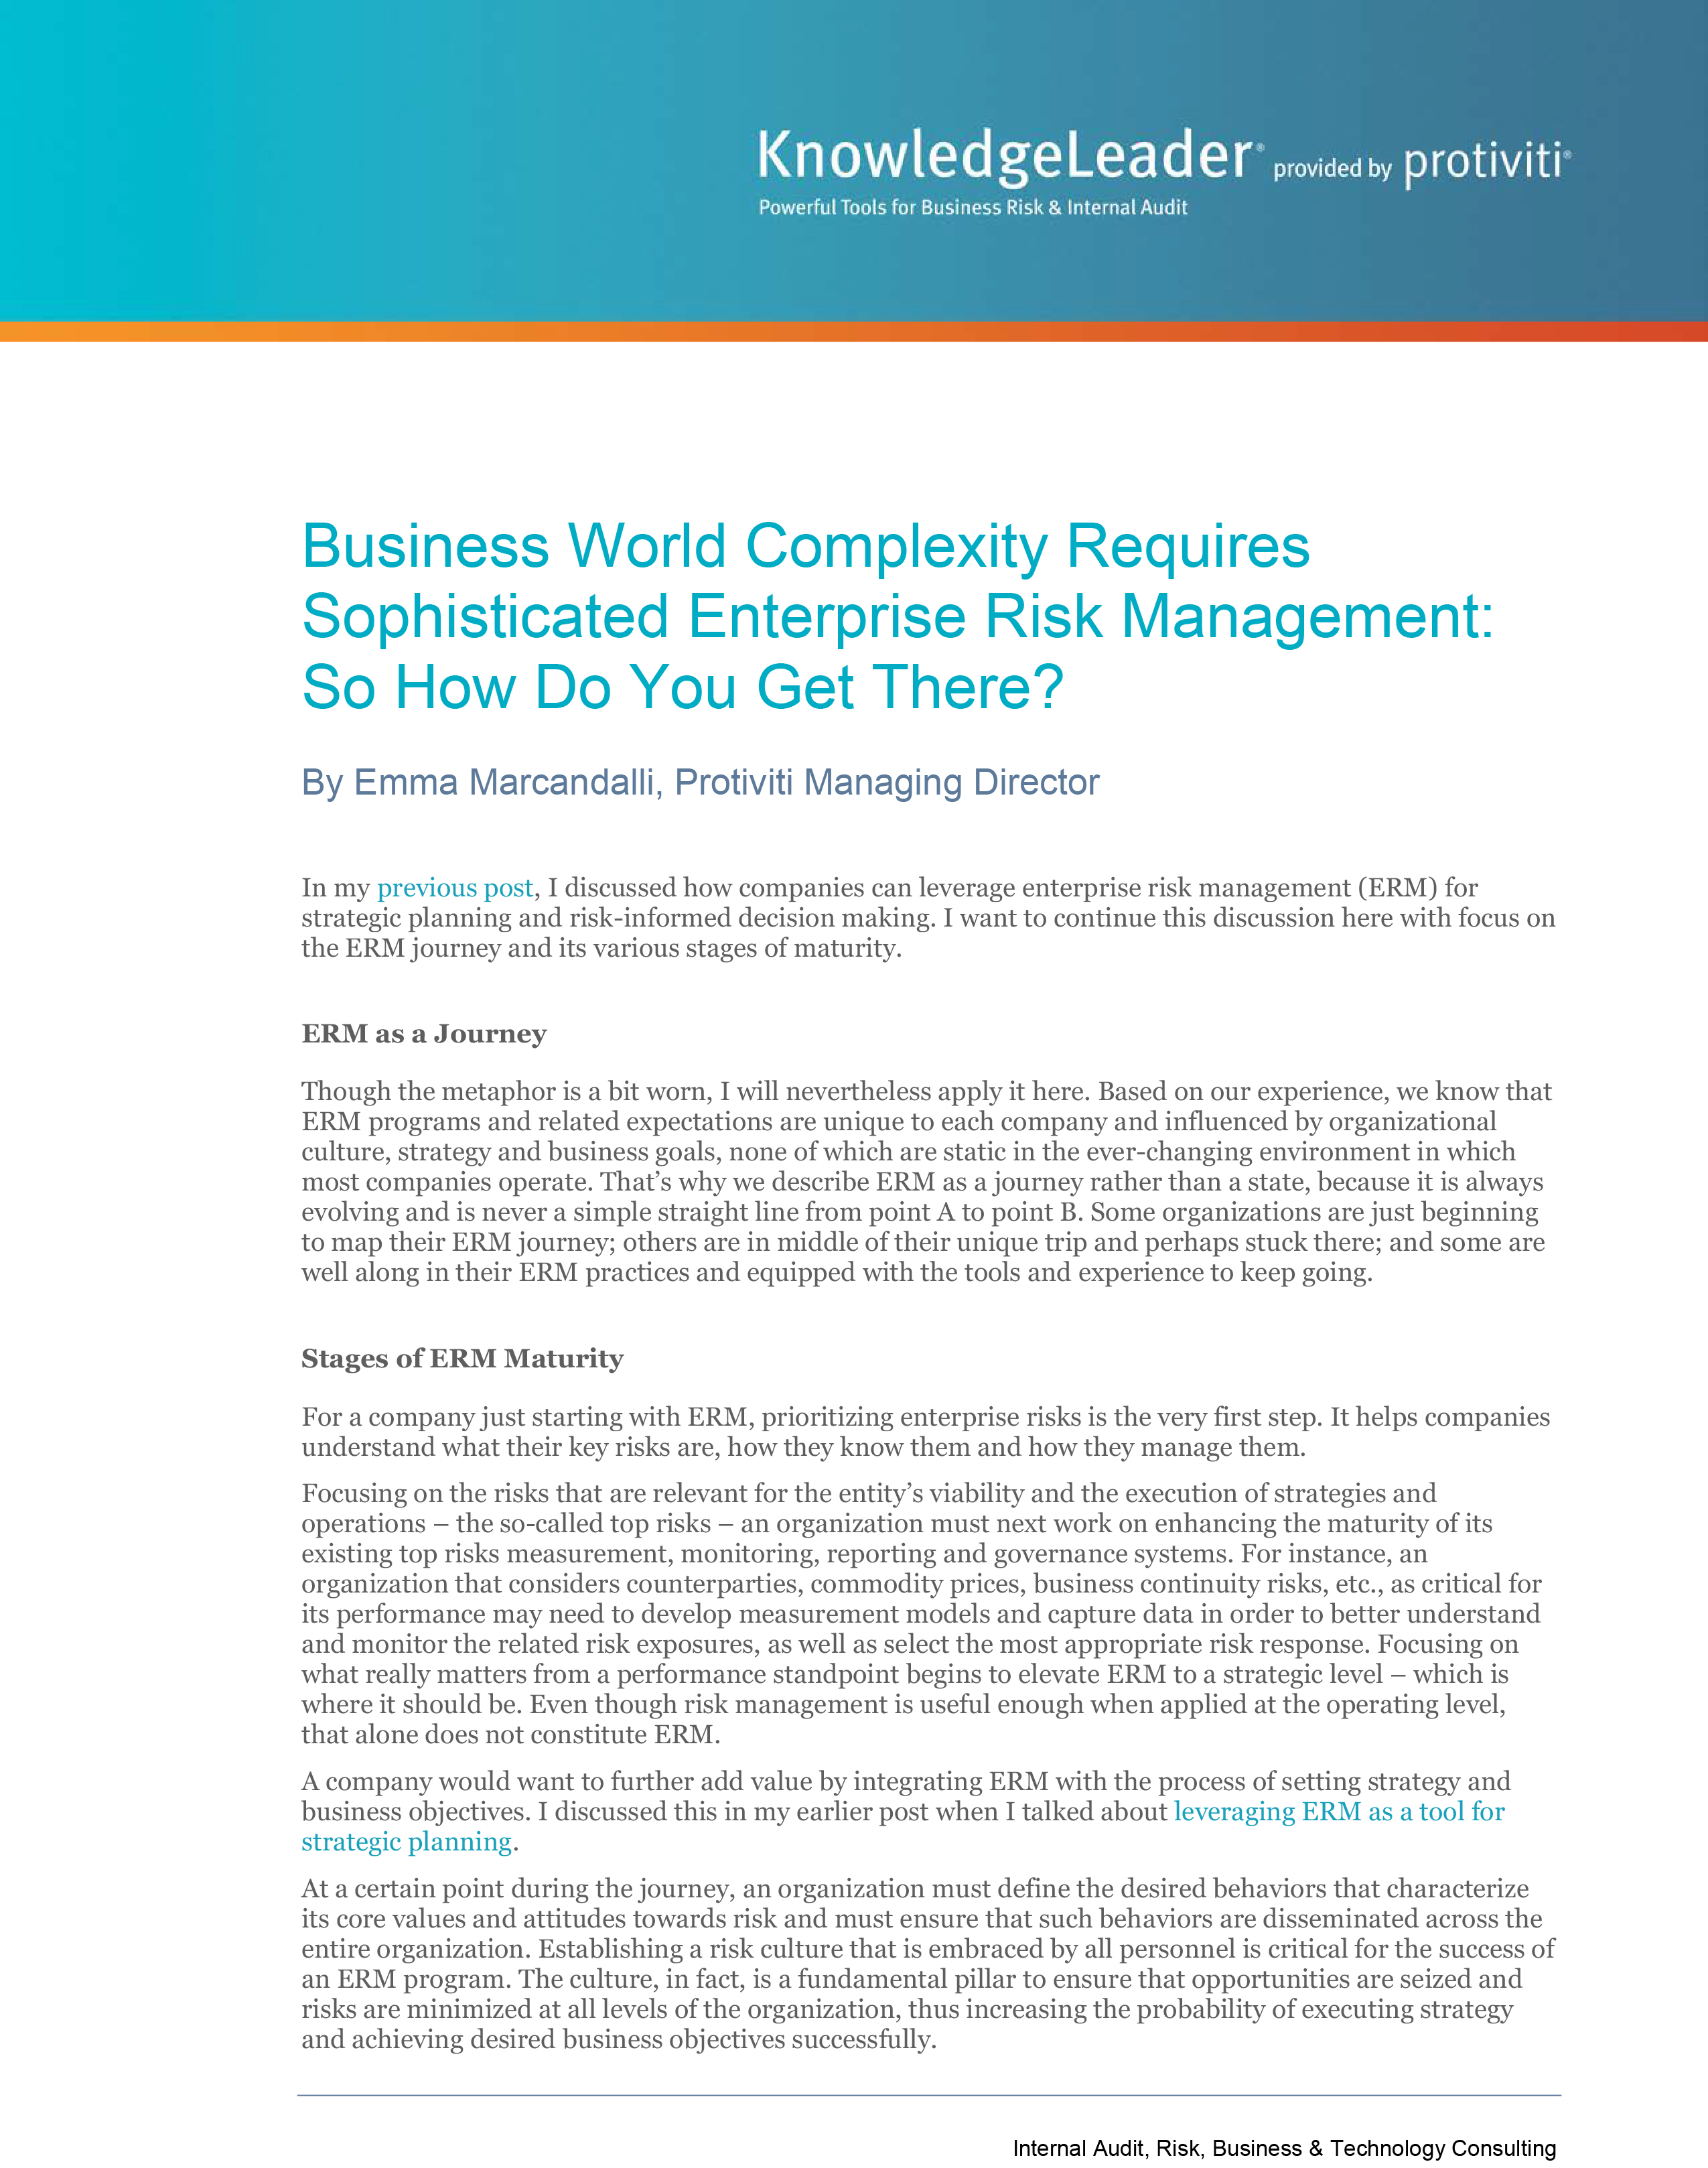 Screenshot of the first page of Business World Complexity Requires Sophisticated Enterprise Risk Management-So How Do You Get There